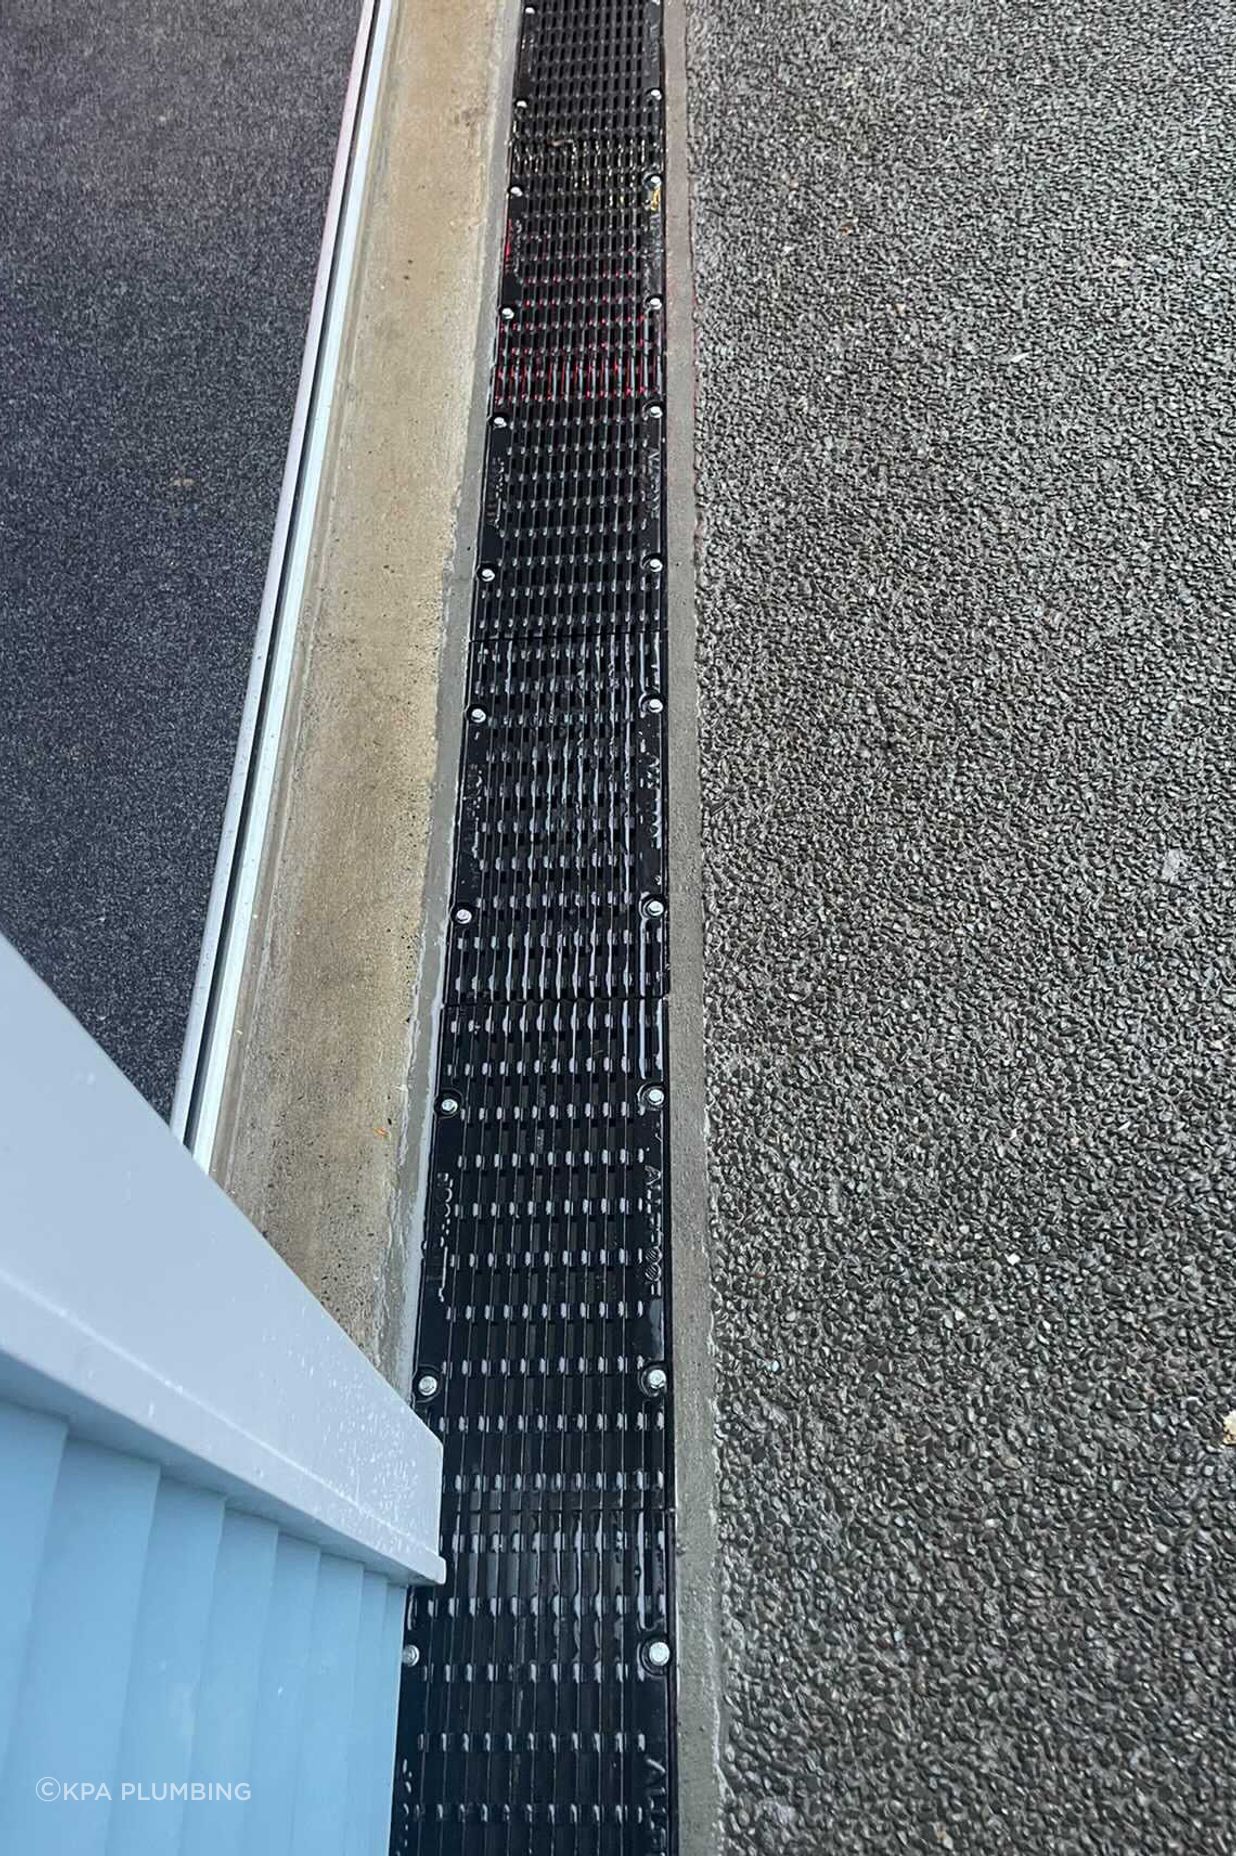 Channel drains are a common solution for existing homes.